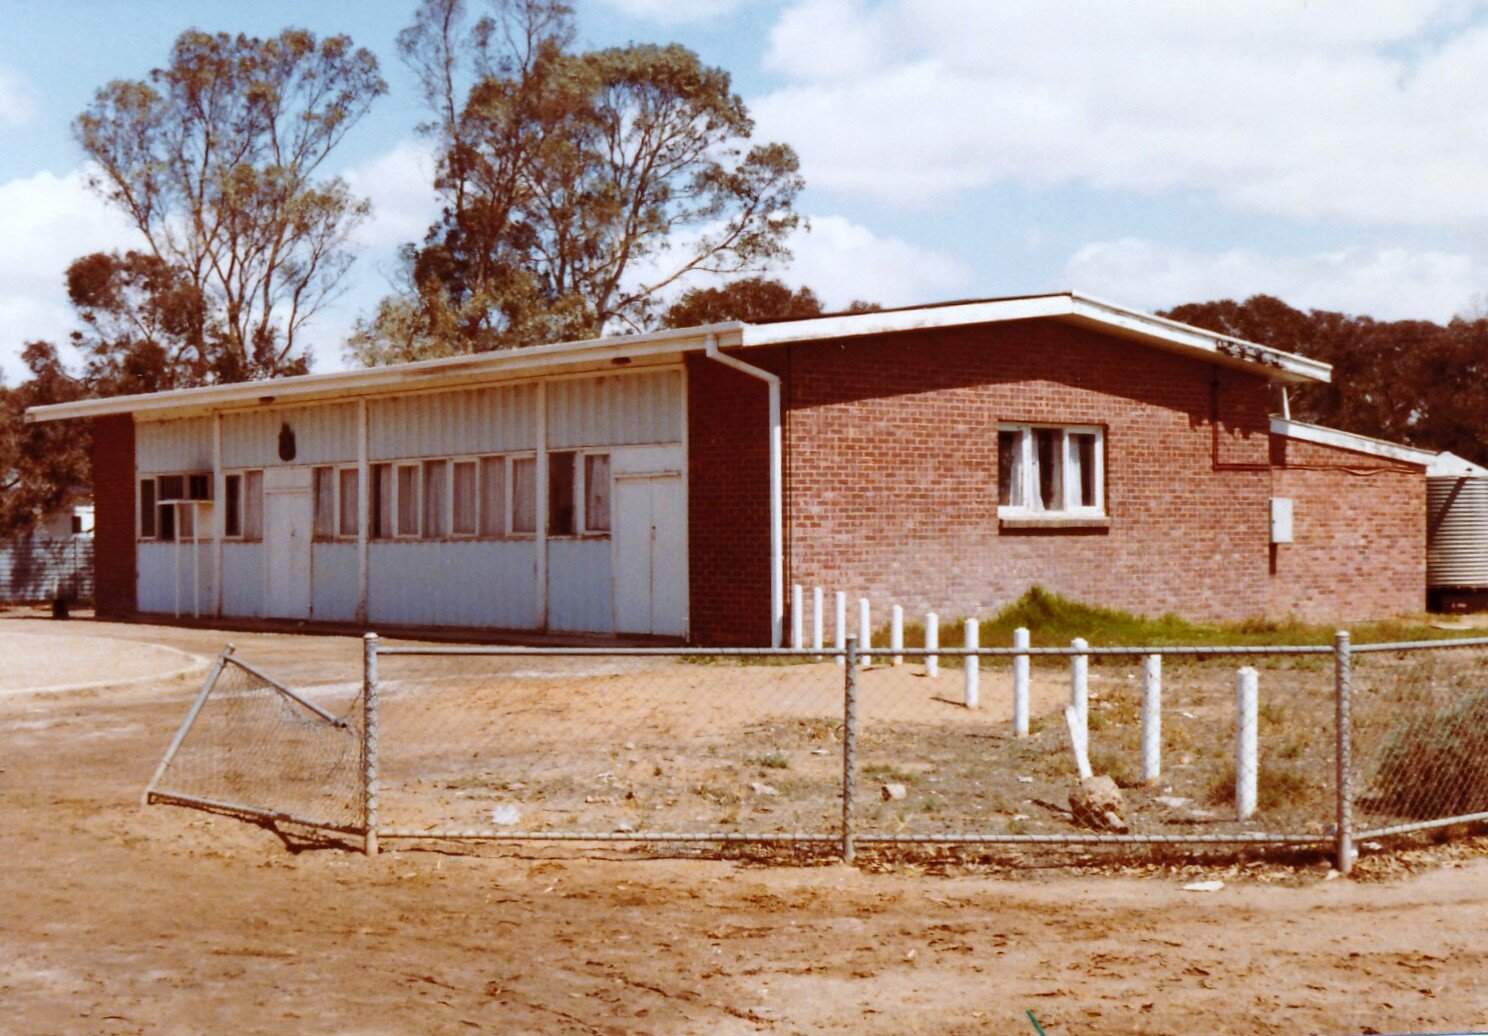  RSL Building - September 1982 Many private and community events were also held here. Enid Blieschke Collection 